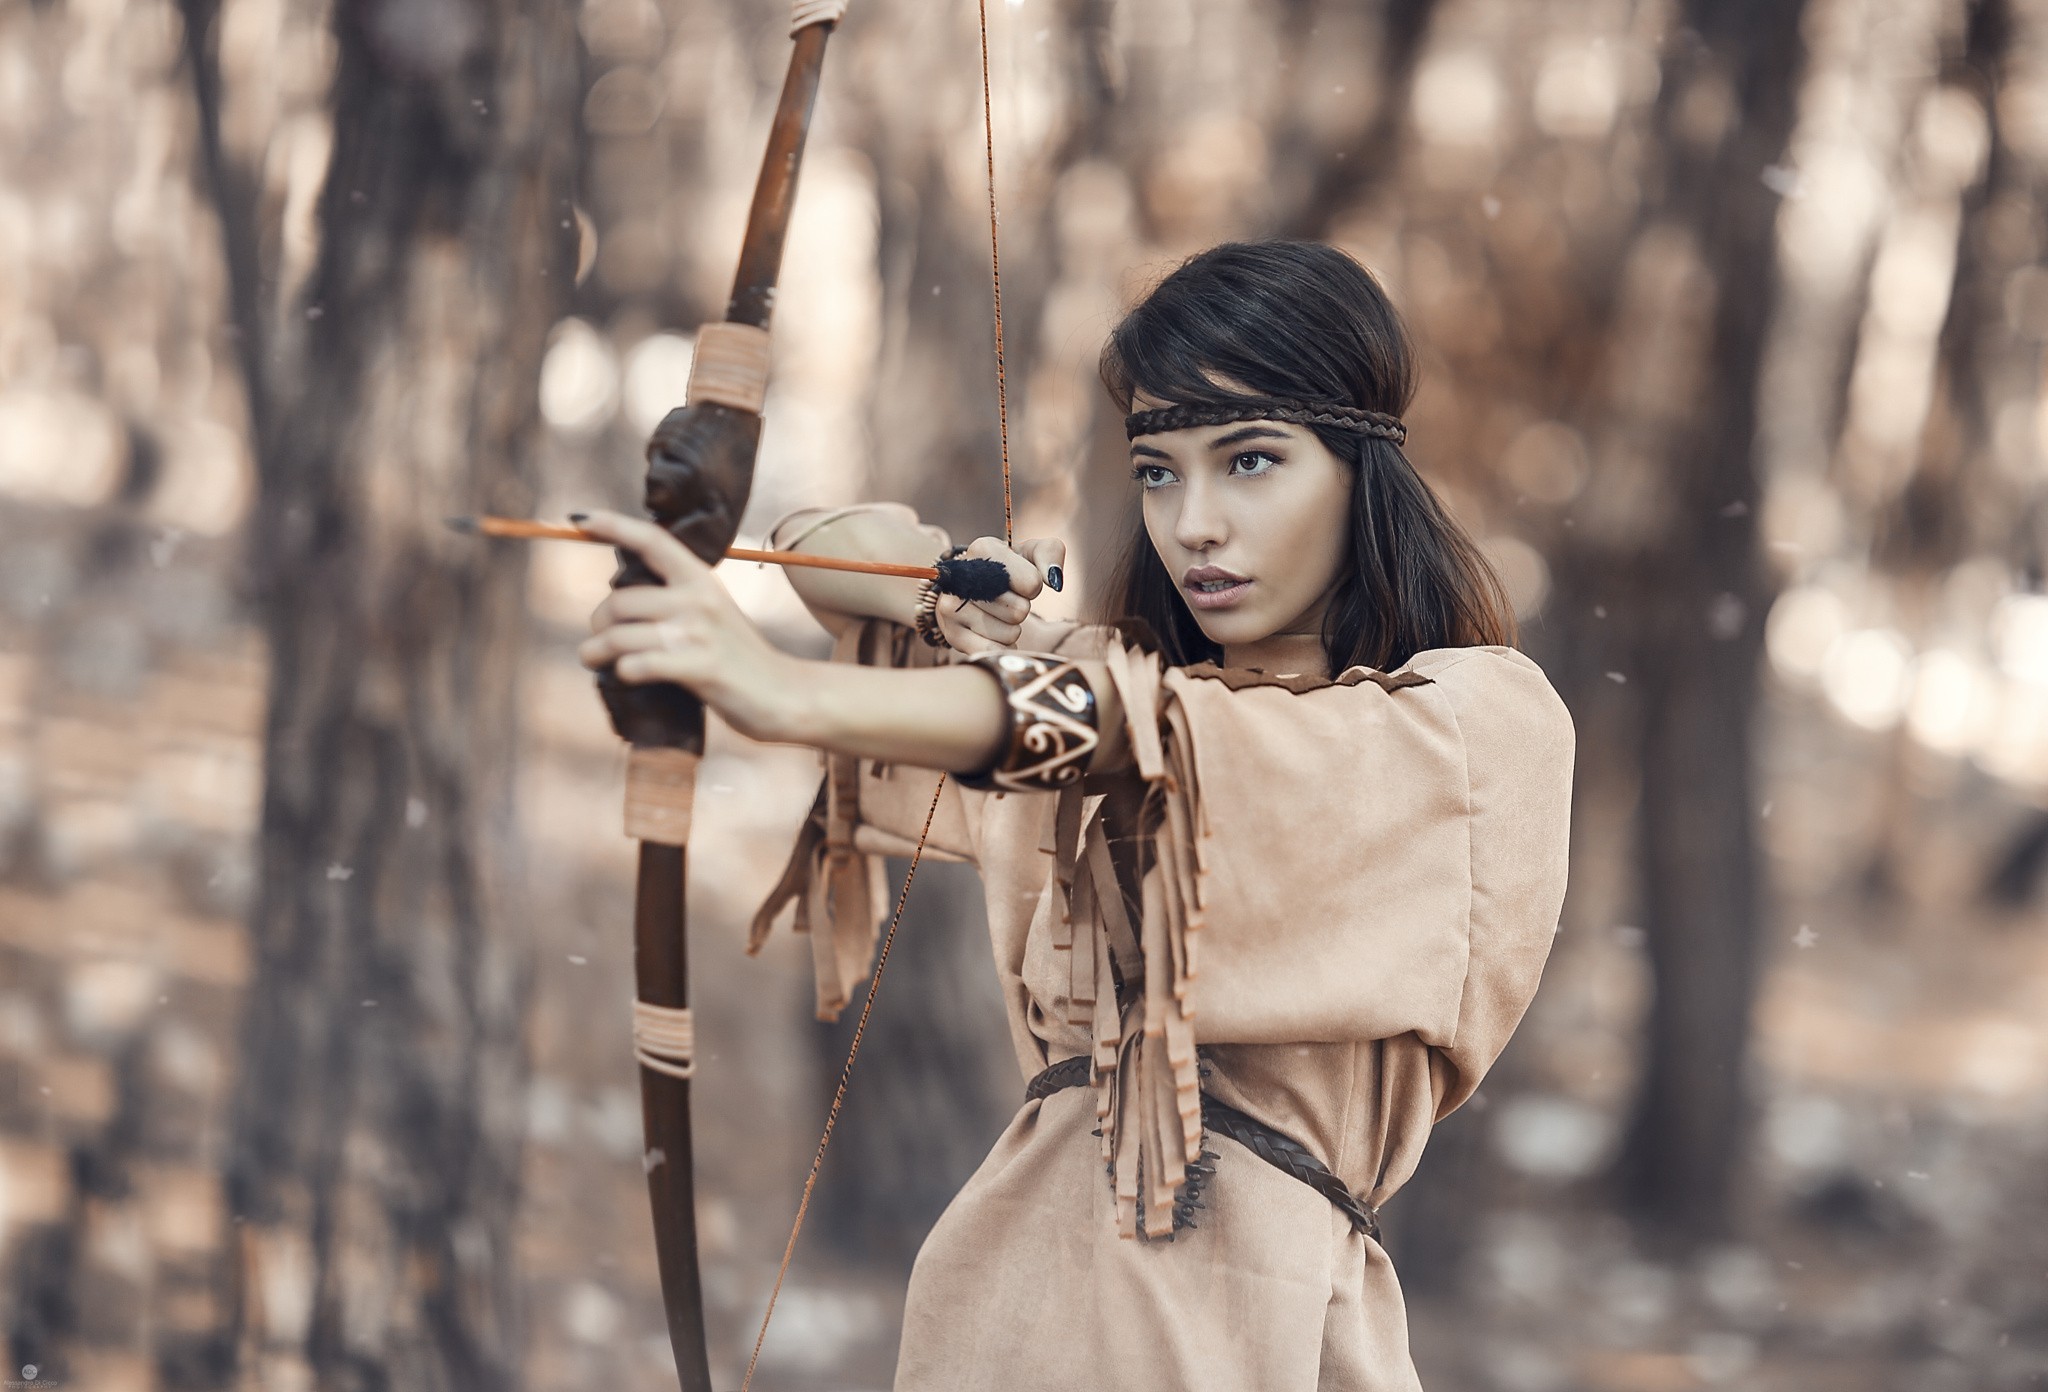 People 2048x1392 women photography bow and arrow archery Alessandro Di Cicco hairband bow arrows aiming dark hair makeup painted nails black nails women outdoors outdoors model